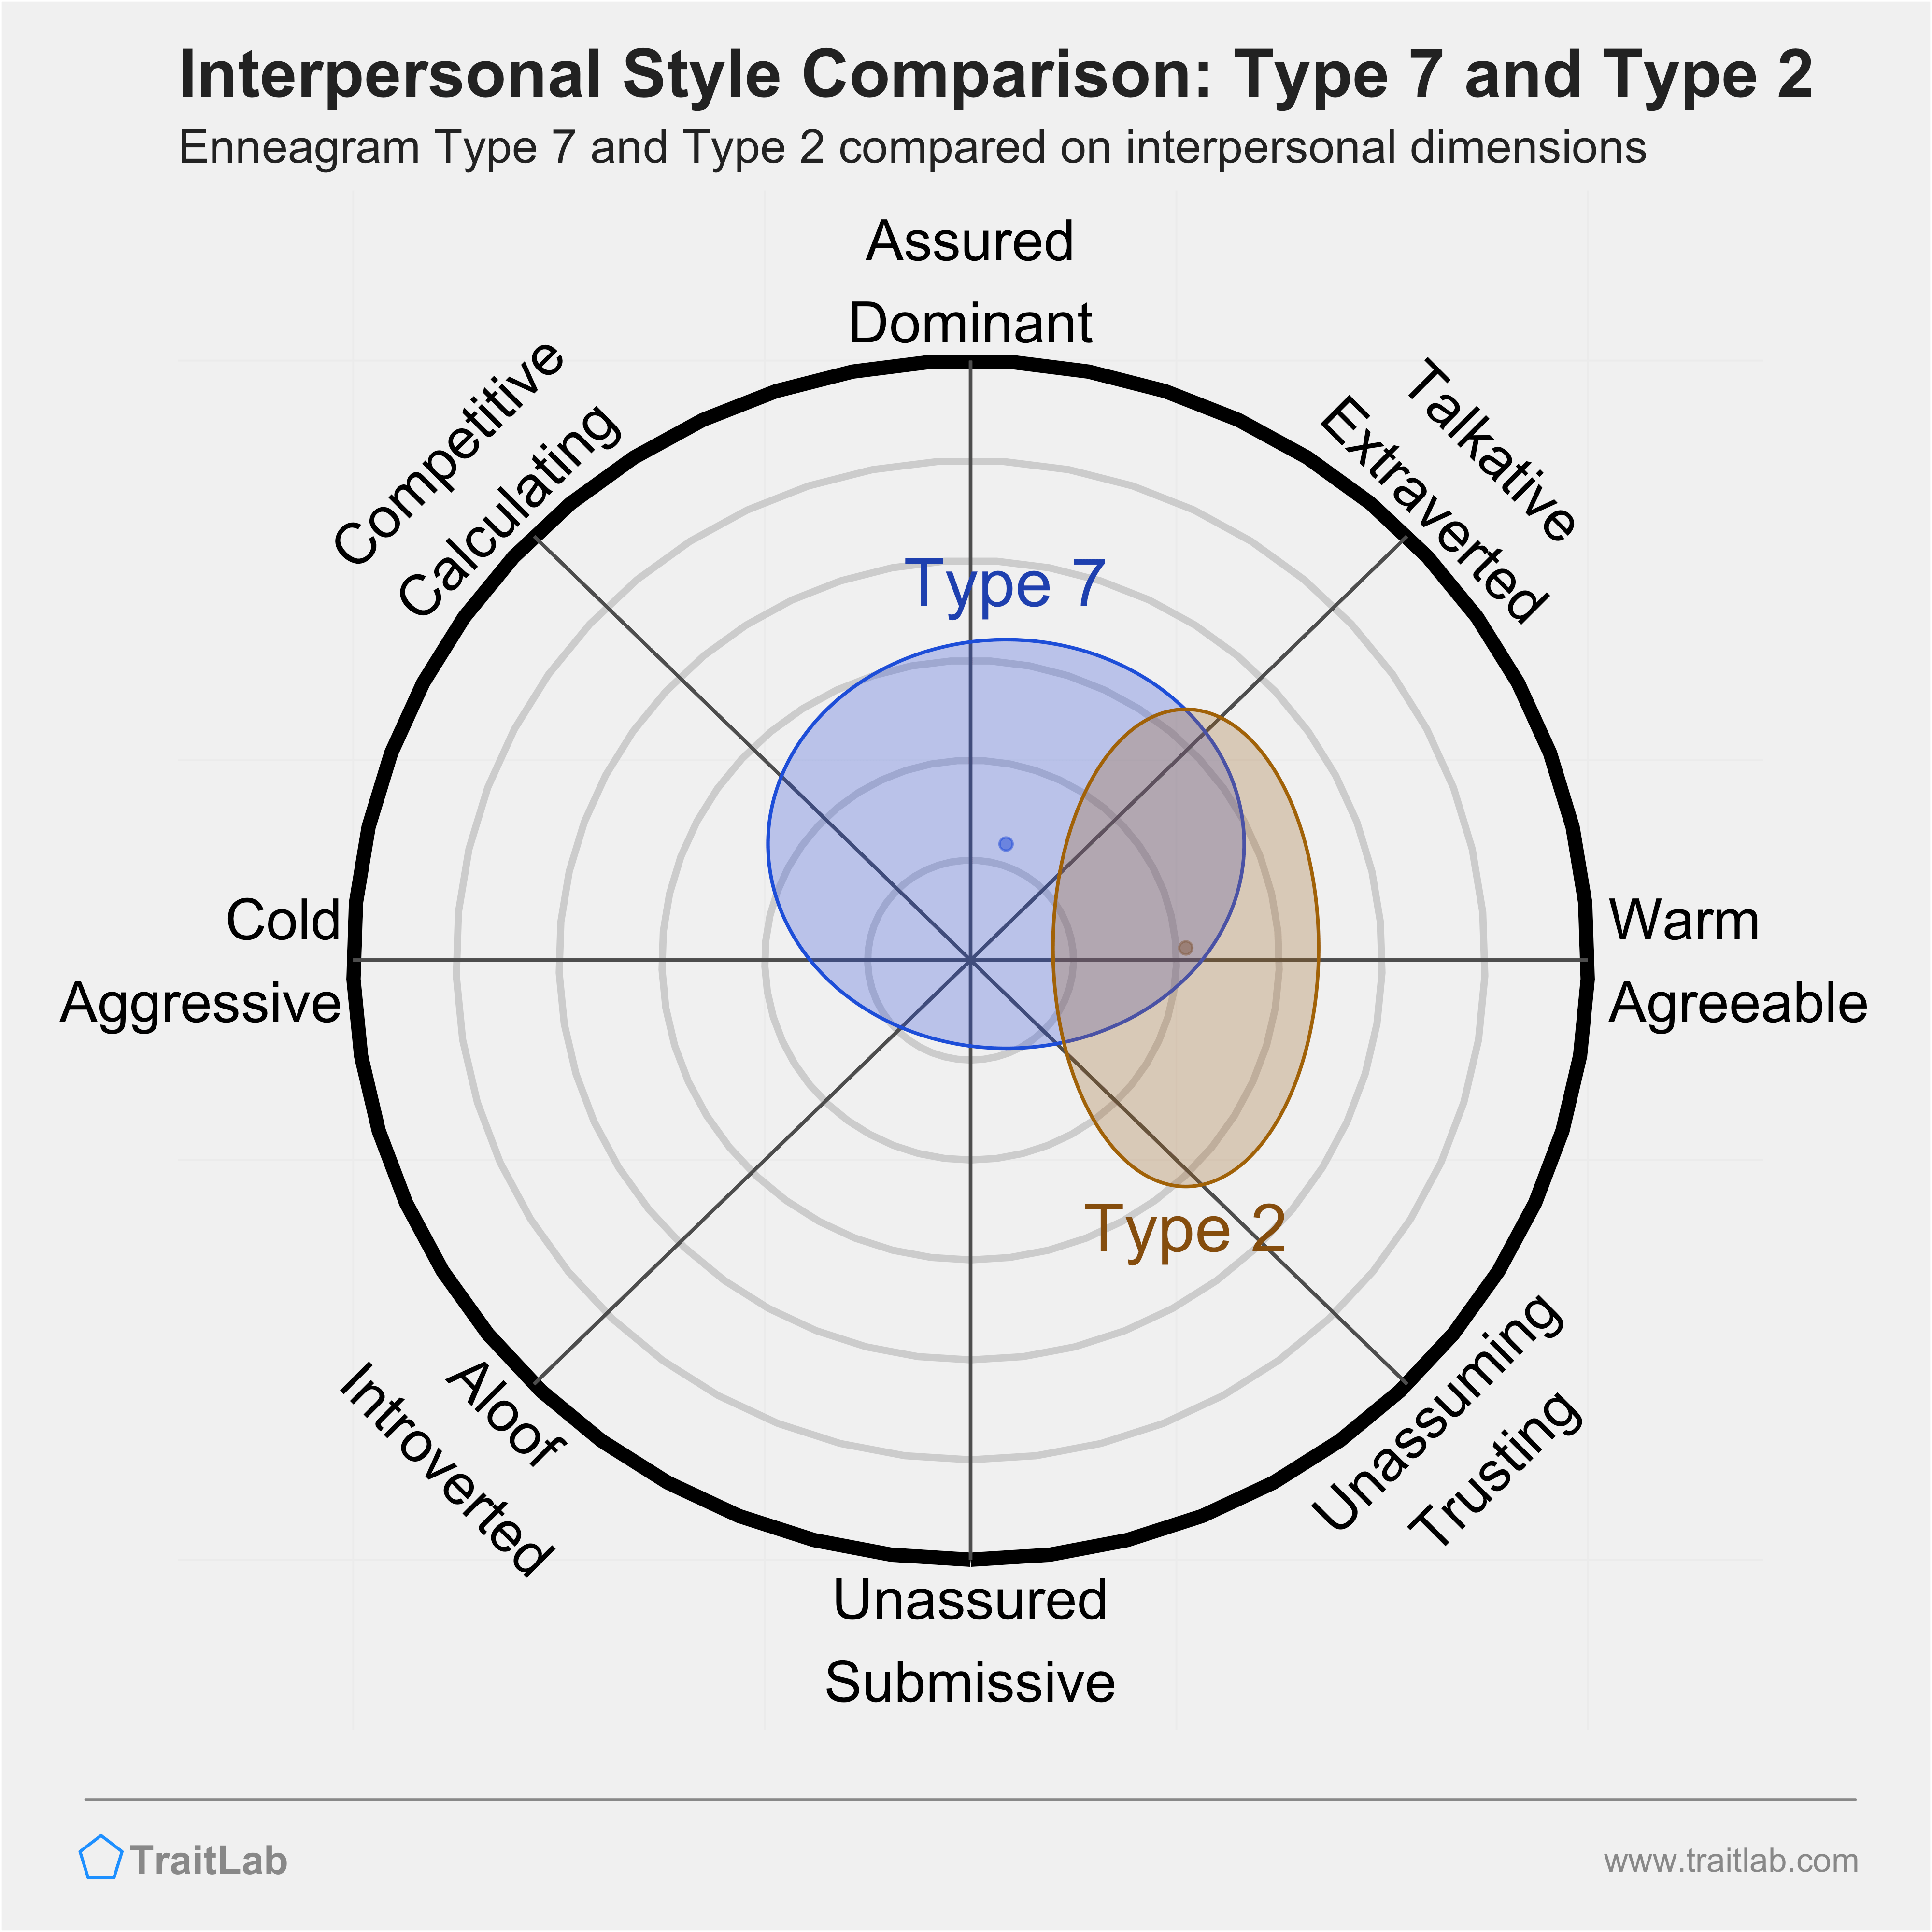 Enneagram Type 7 and Type 2 comparison across interpersonal dimensions